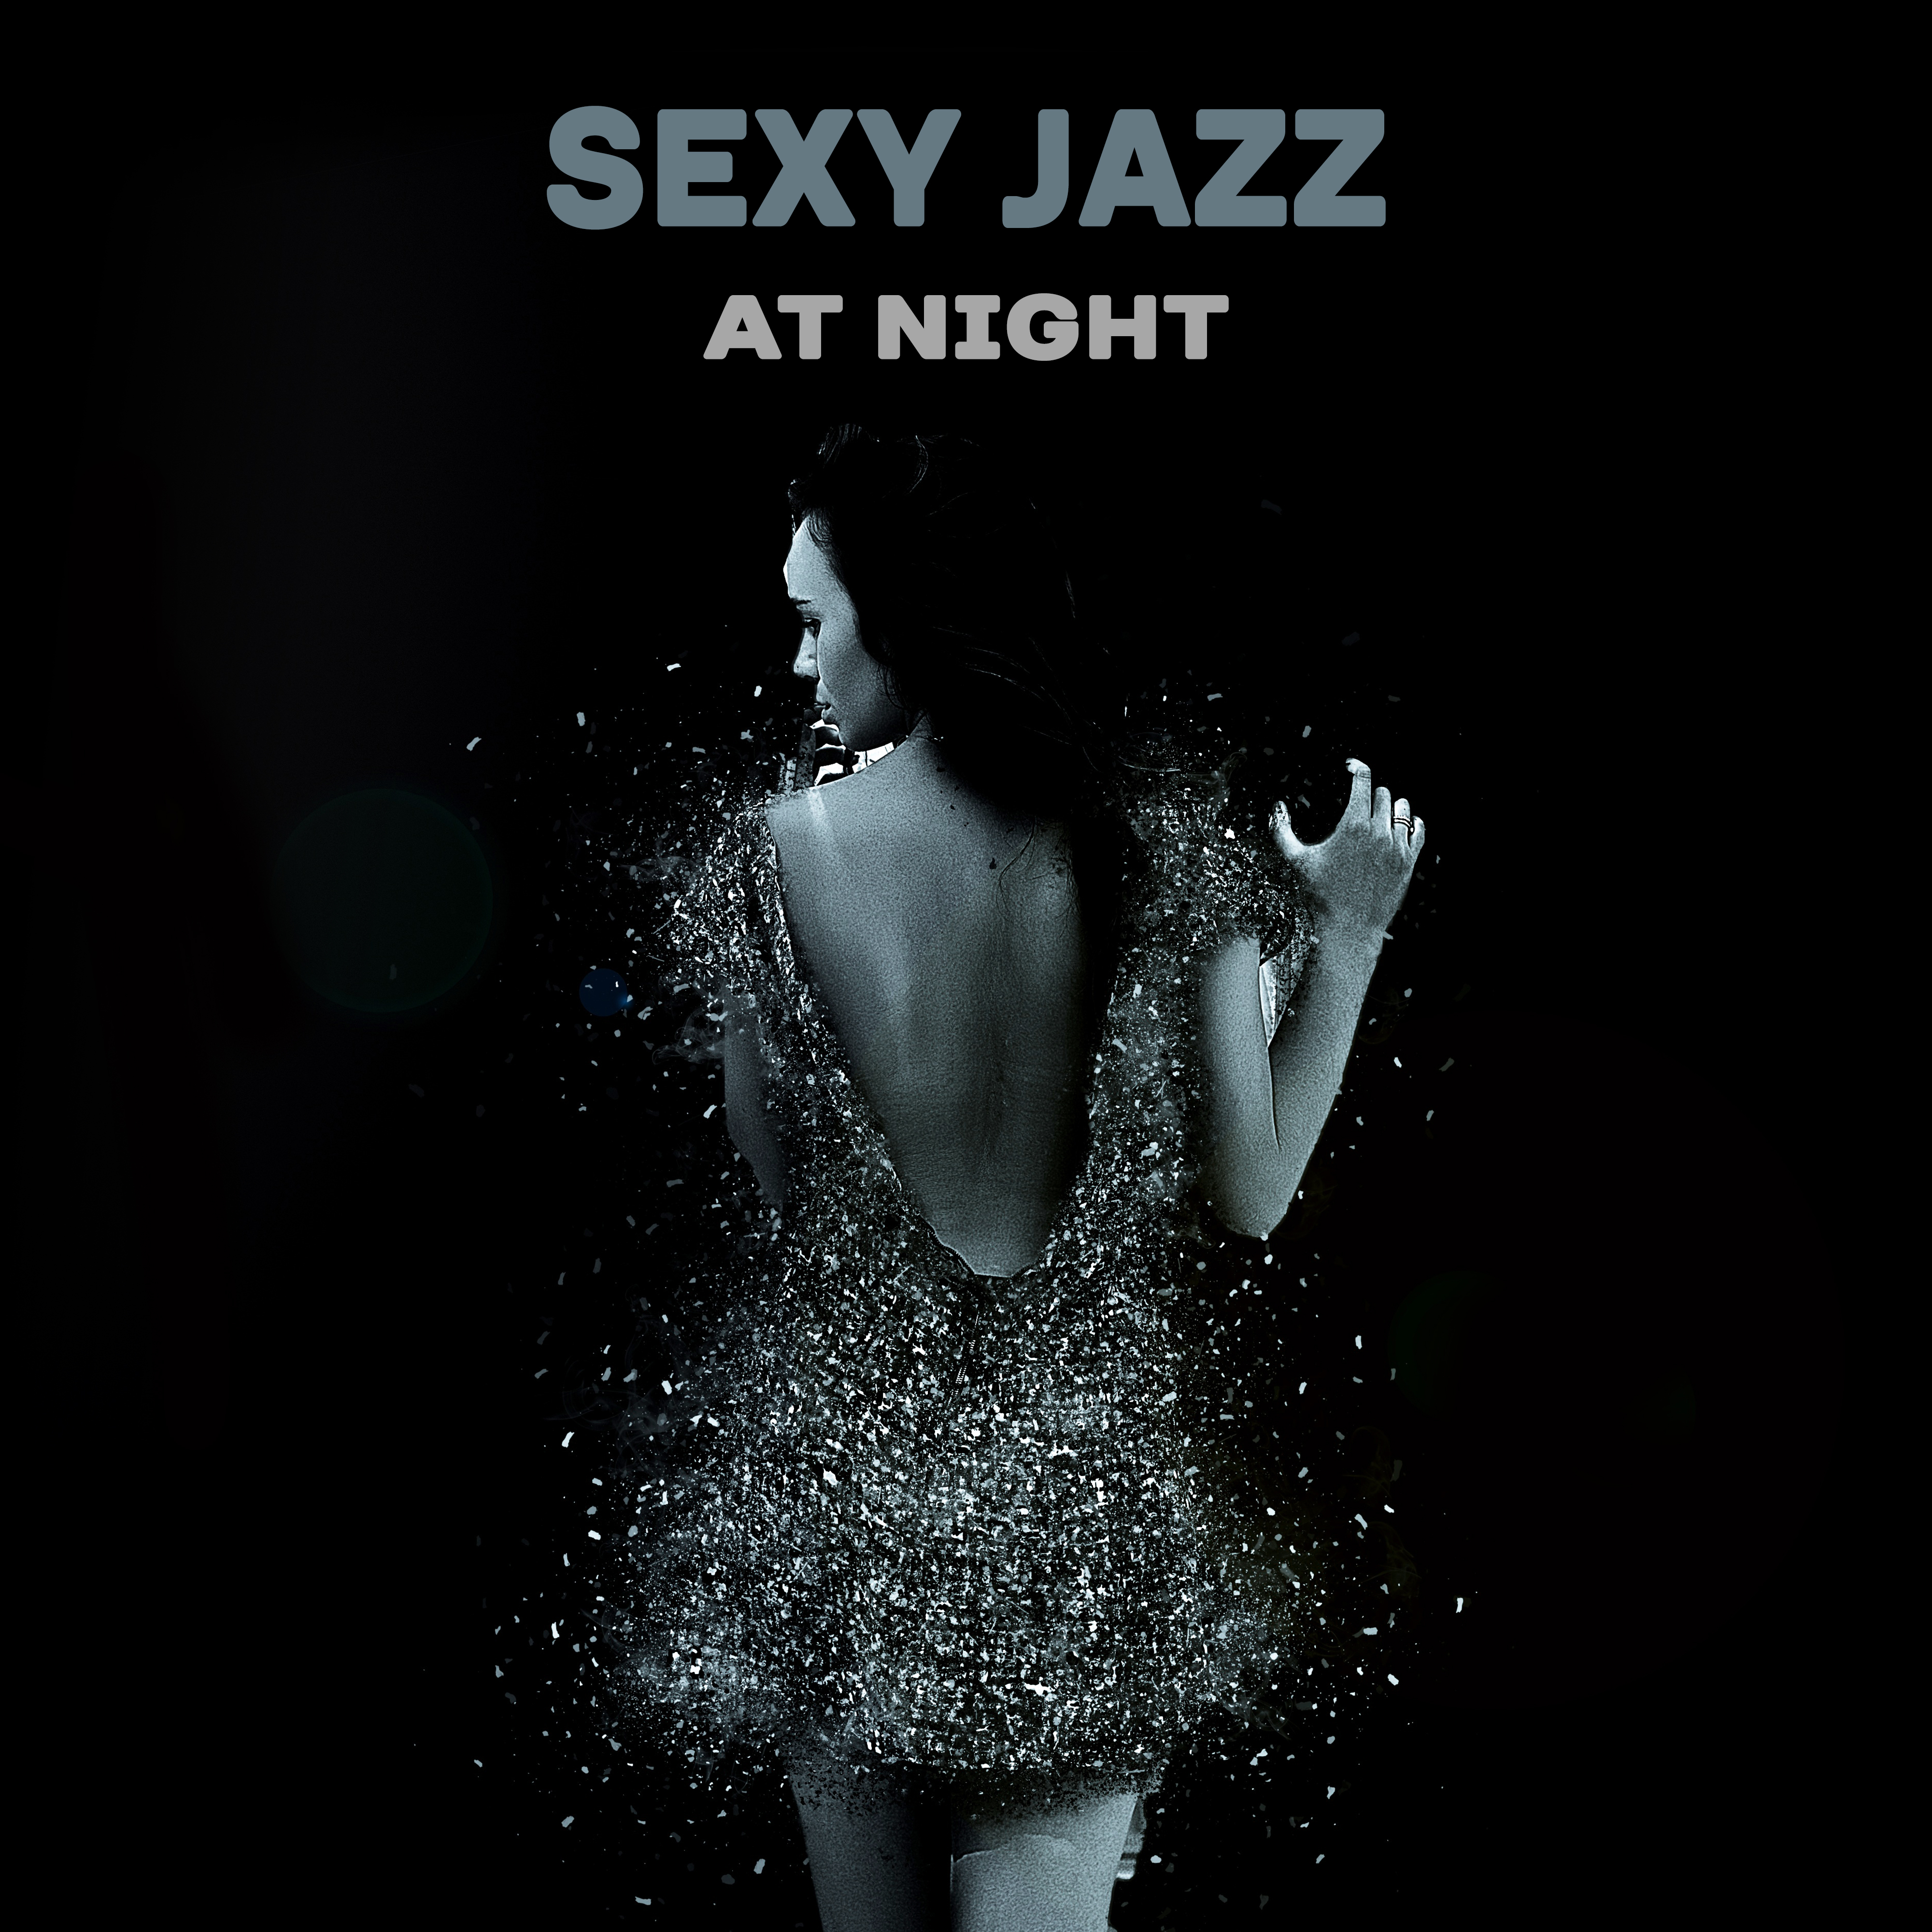 Sexy Jazz at Night  Sensual Music for Lovers, Erotic Lounge, Deep Massage, Tantric Sex, Romantic Night, Gentle Piano, Smooth Jazz